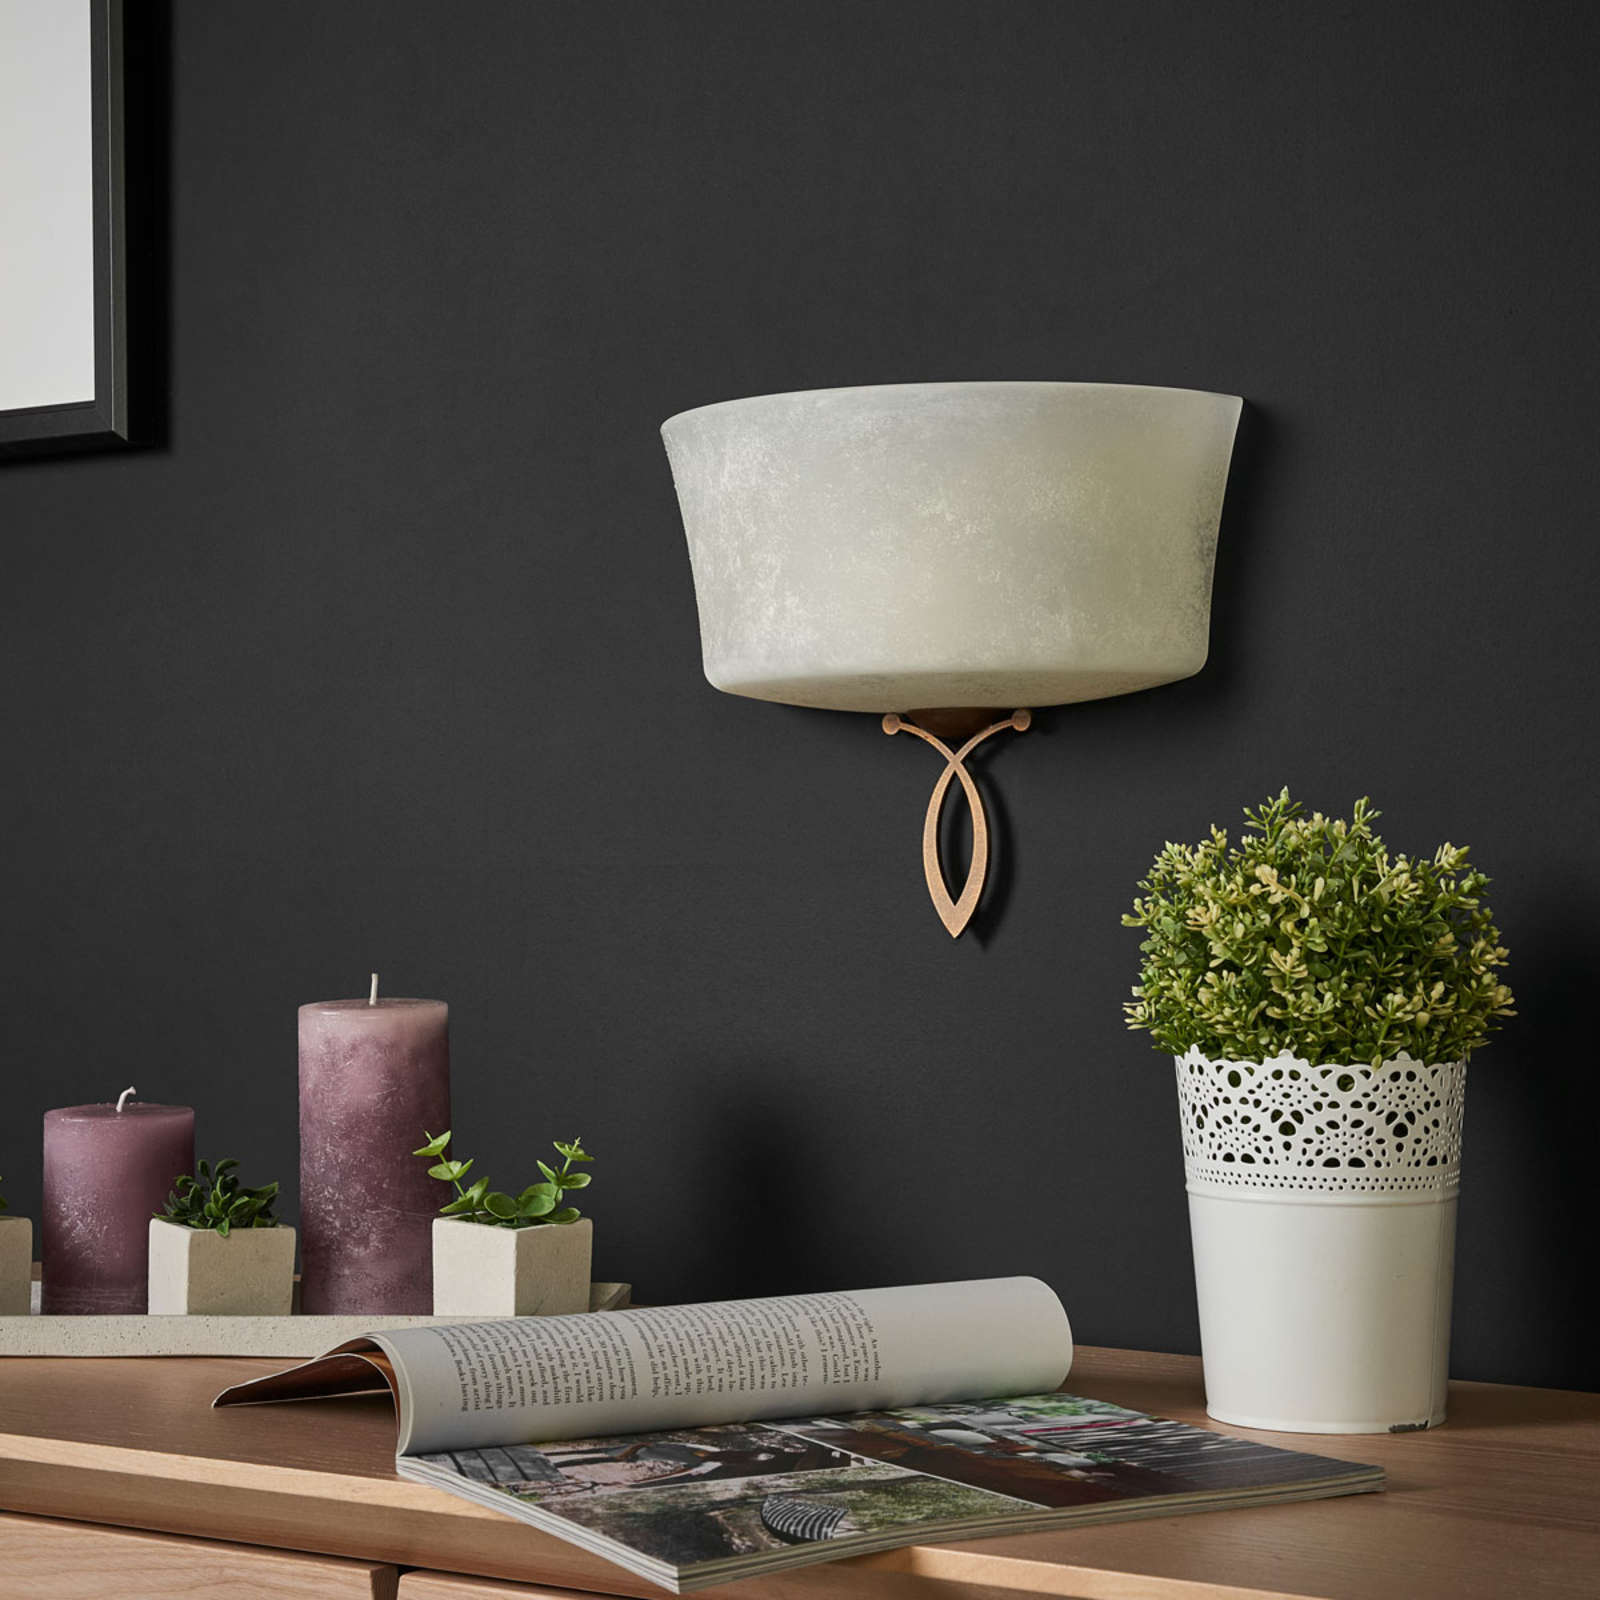 Alessio wall light in an uplighter design